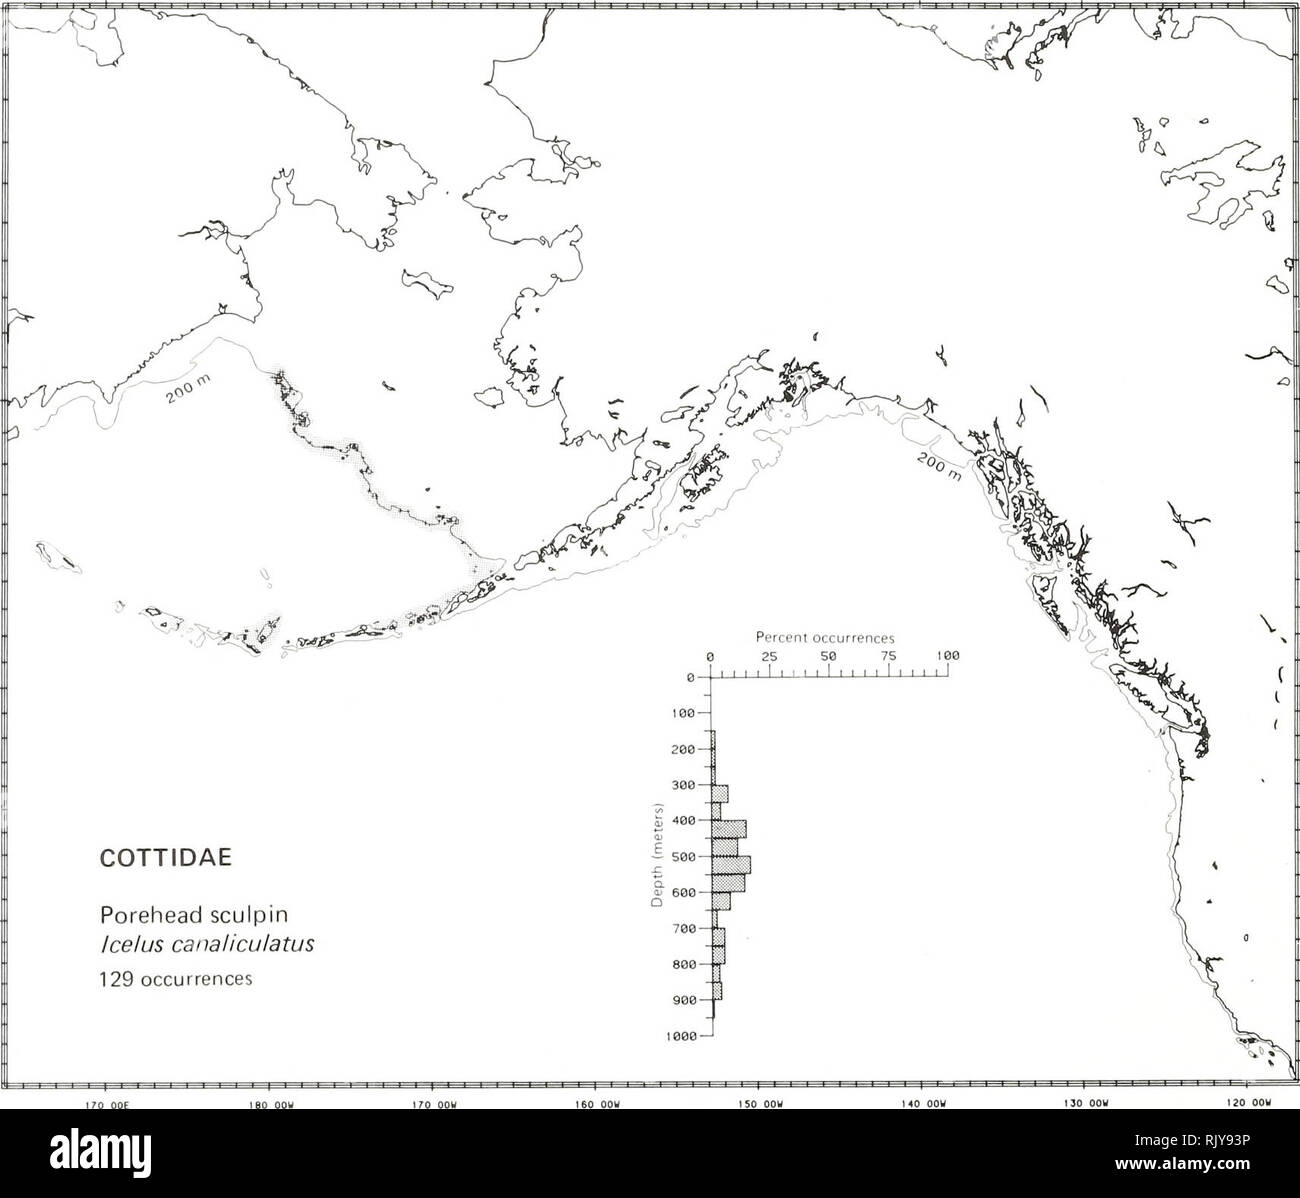 . Atlas and zoogeography of common fishes in the Bering Sea and Northeastern Pacific / M. James Allen, Gary B. Smith. Fishes Bering Sea Geographical distribution.. POREHEAD SCULPIN, Icelus canaliculatus Gilbert 1896 Cottidae: Sculpins Literature Reported from Hokkaido, Japan, to the eastern Bering Sea, west to Unalaska Island in the Aleutian Islands, and east to the Gulf of Alaska (Quast and Hall 1972; Howe 1981; Yabe et al. 1983), at depths of 20 to 800 m (Nelson, D. W. 1984). Survey data Found from Navarin Canyon on the northwest slope of the eastern Bering Sea, southeast to Akutan Island in Stock Photo